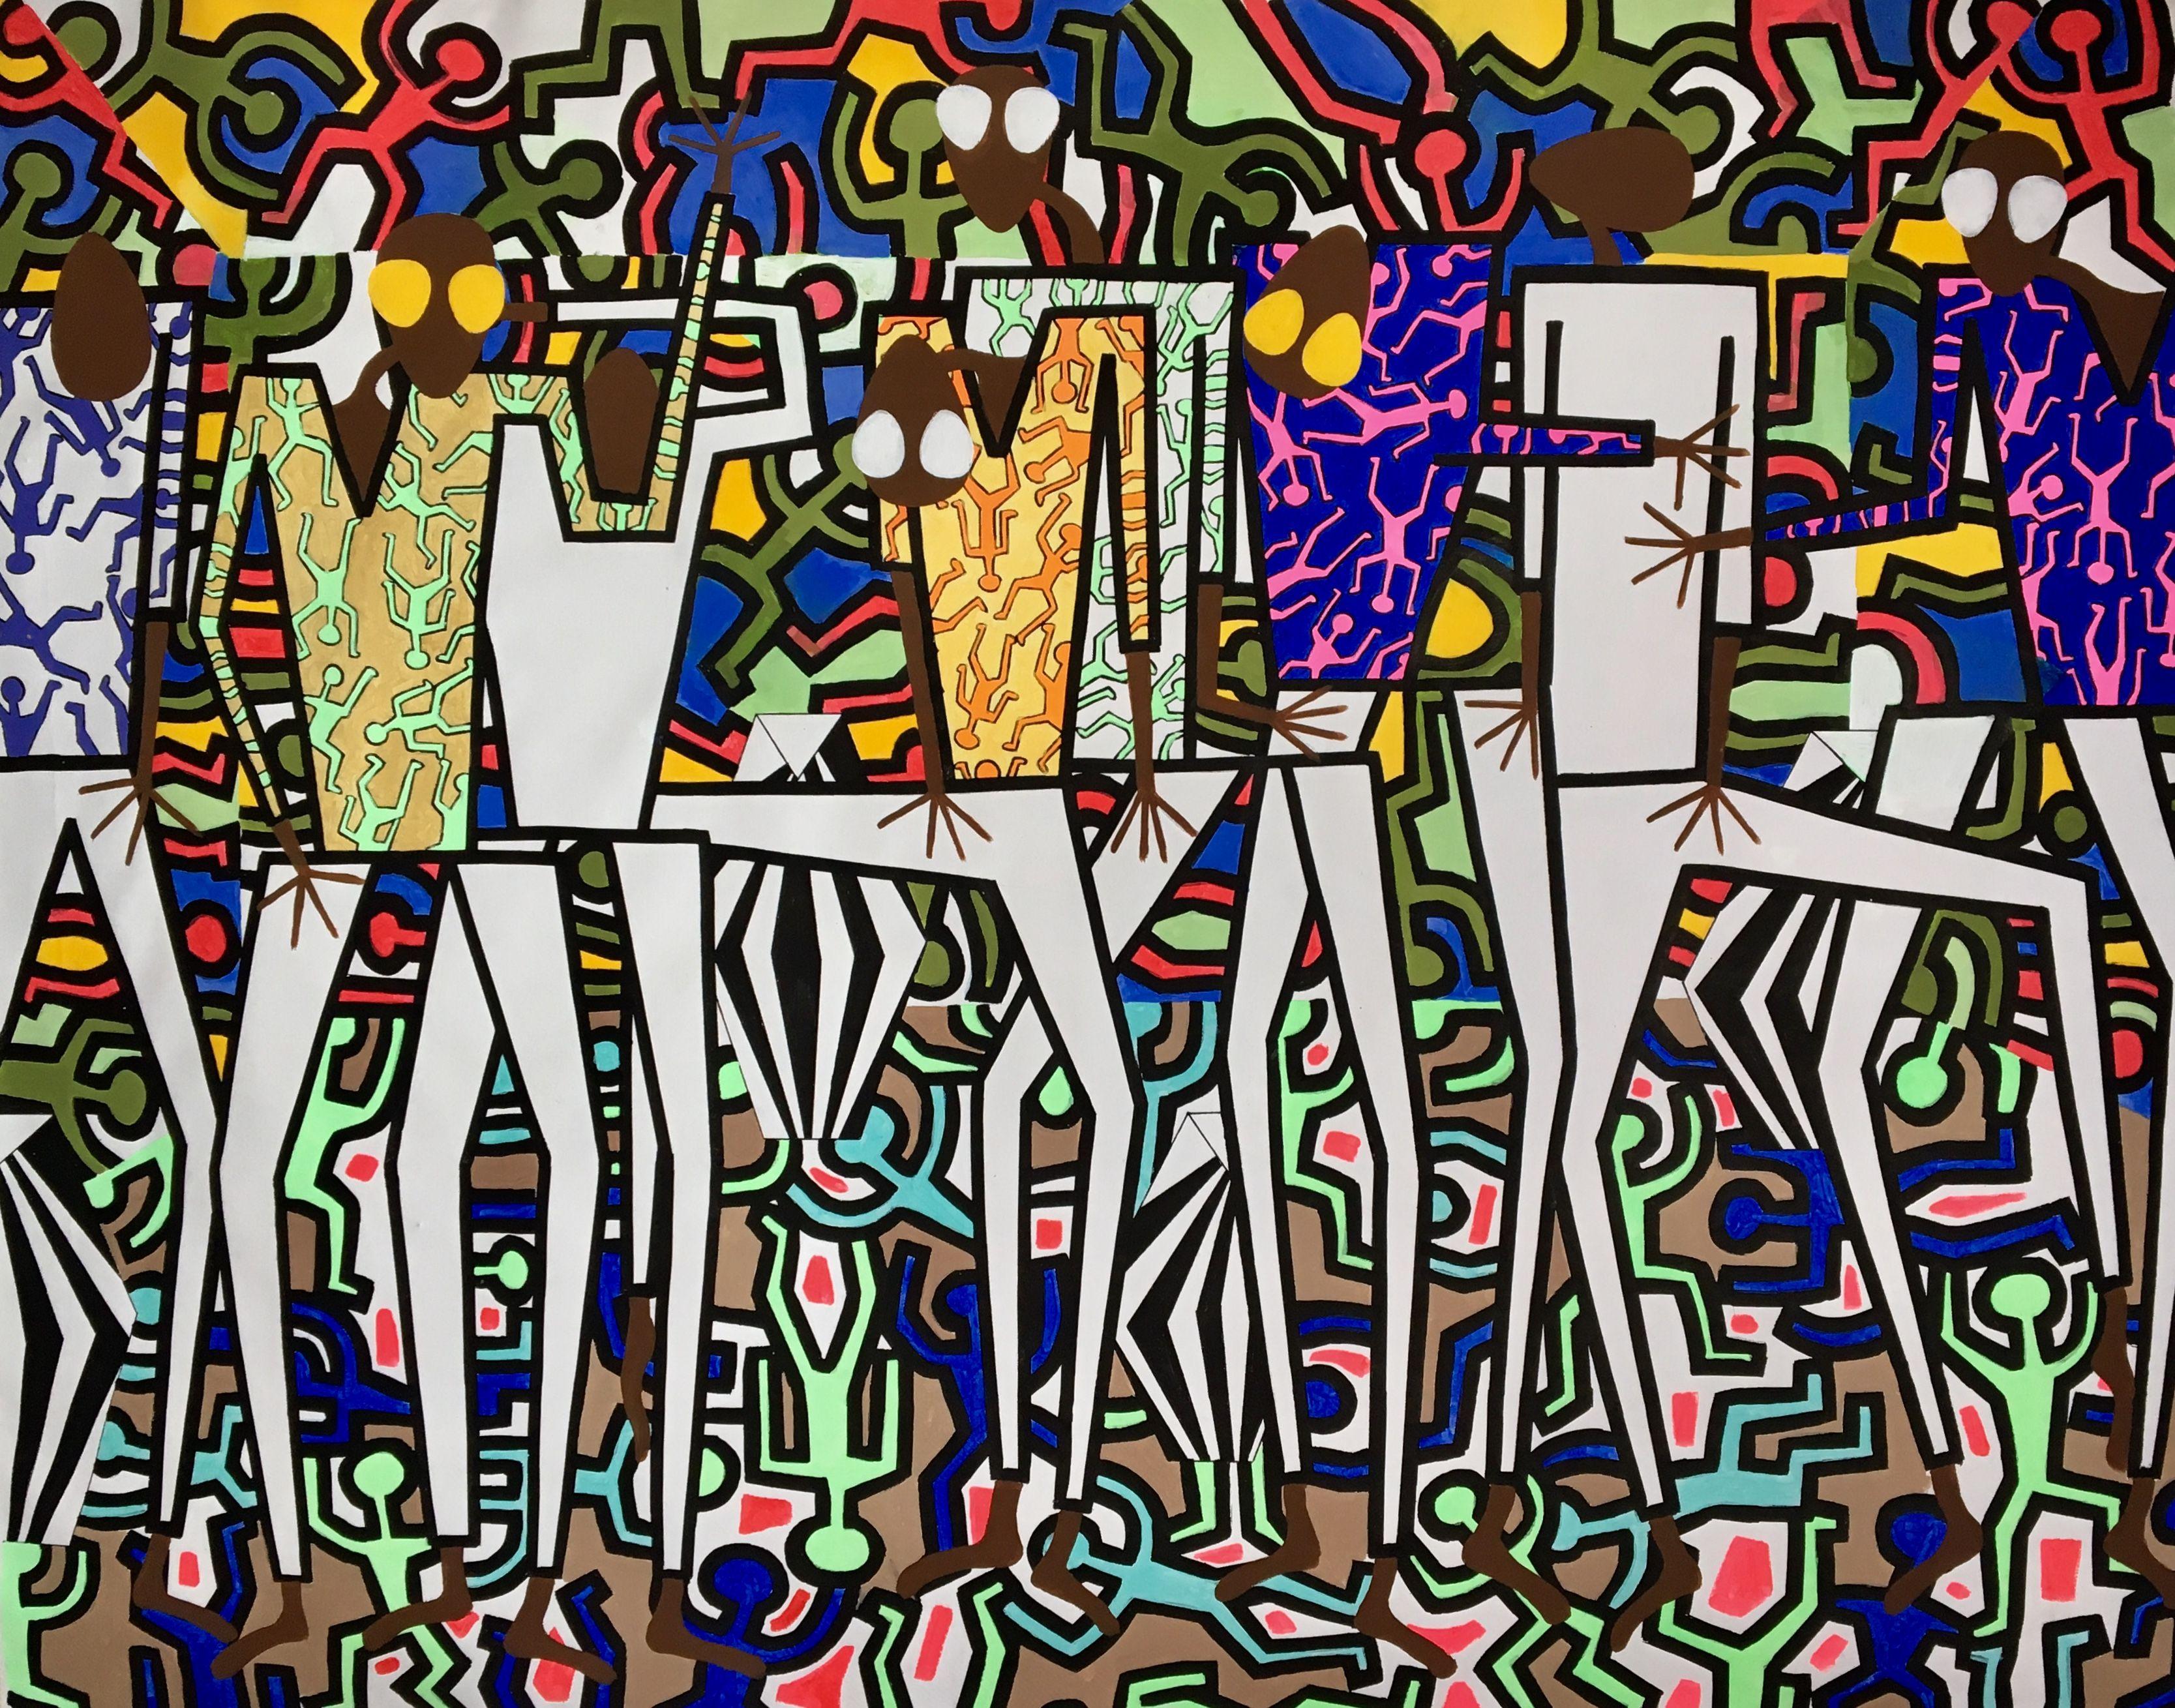 acrylic painting on the canvas inspired by african, Japan and contemporary art directions. CANVAS 162 express some african-like figures with sunglasses decorated with Haring's small decoratins. The figures are on background highly inspired by Keith